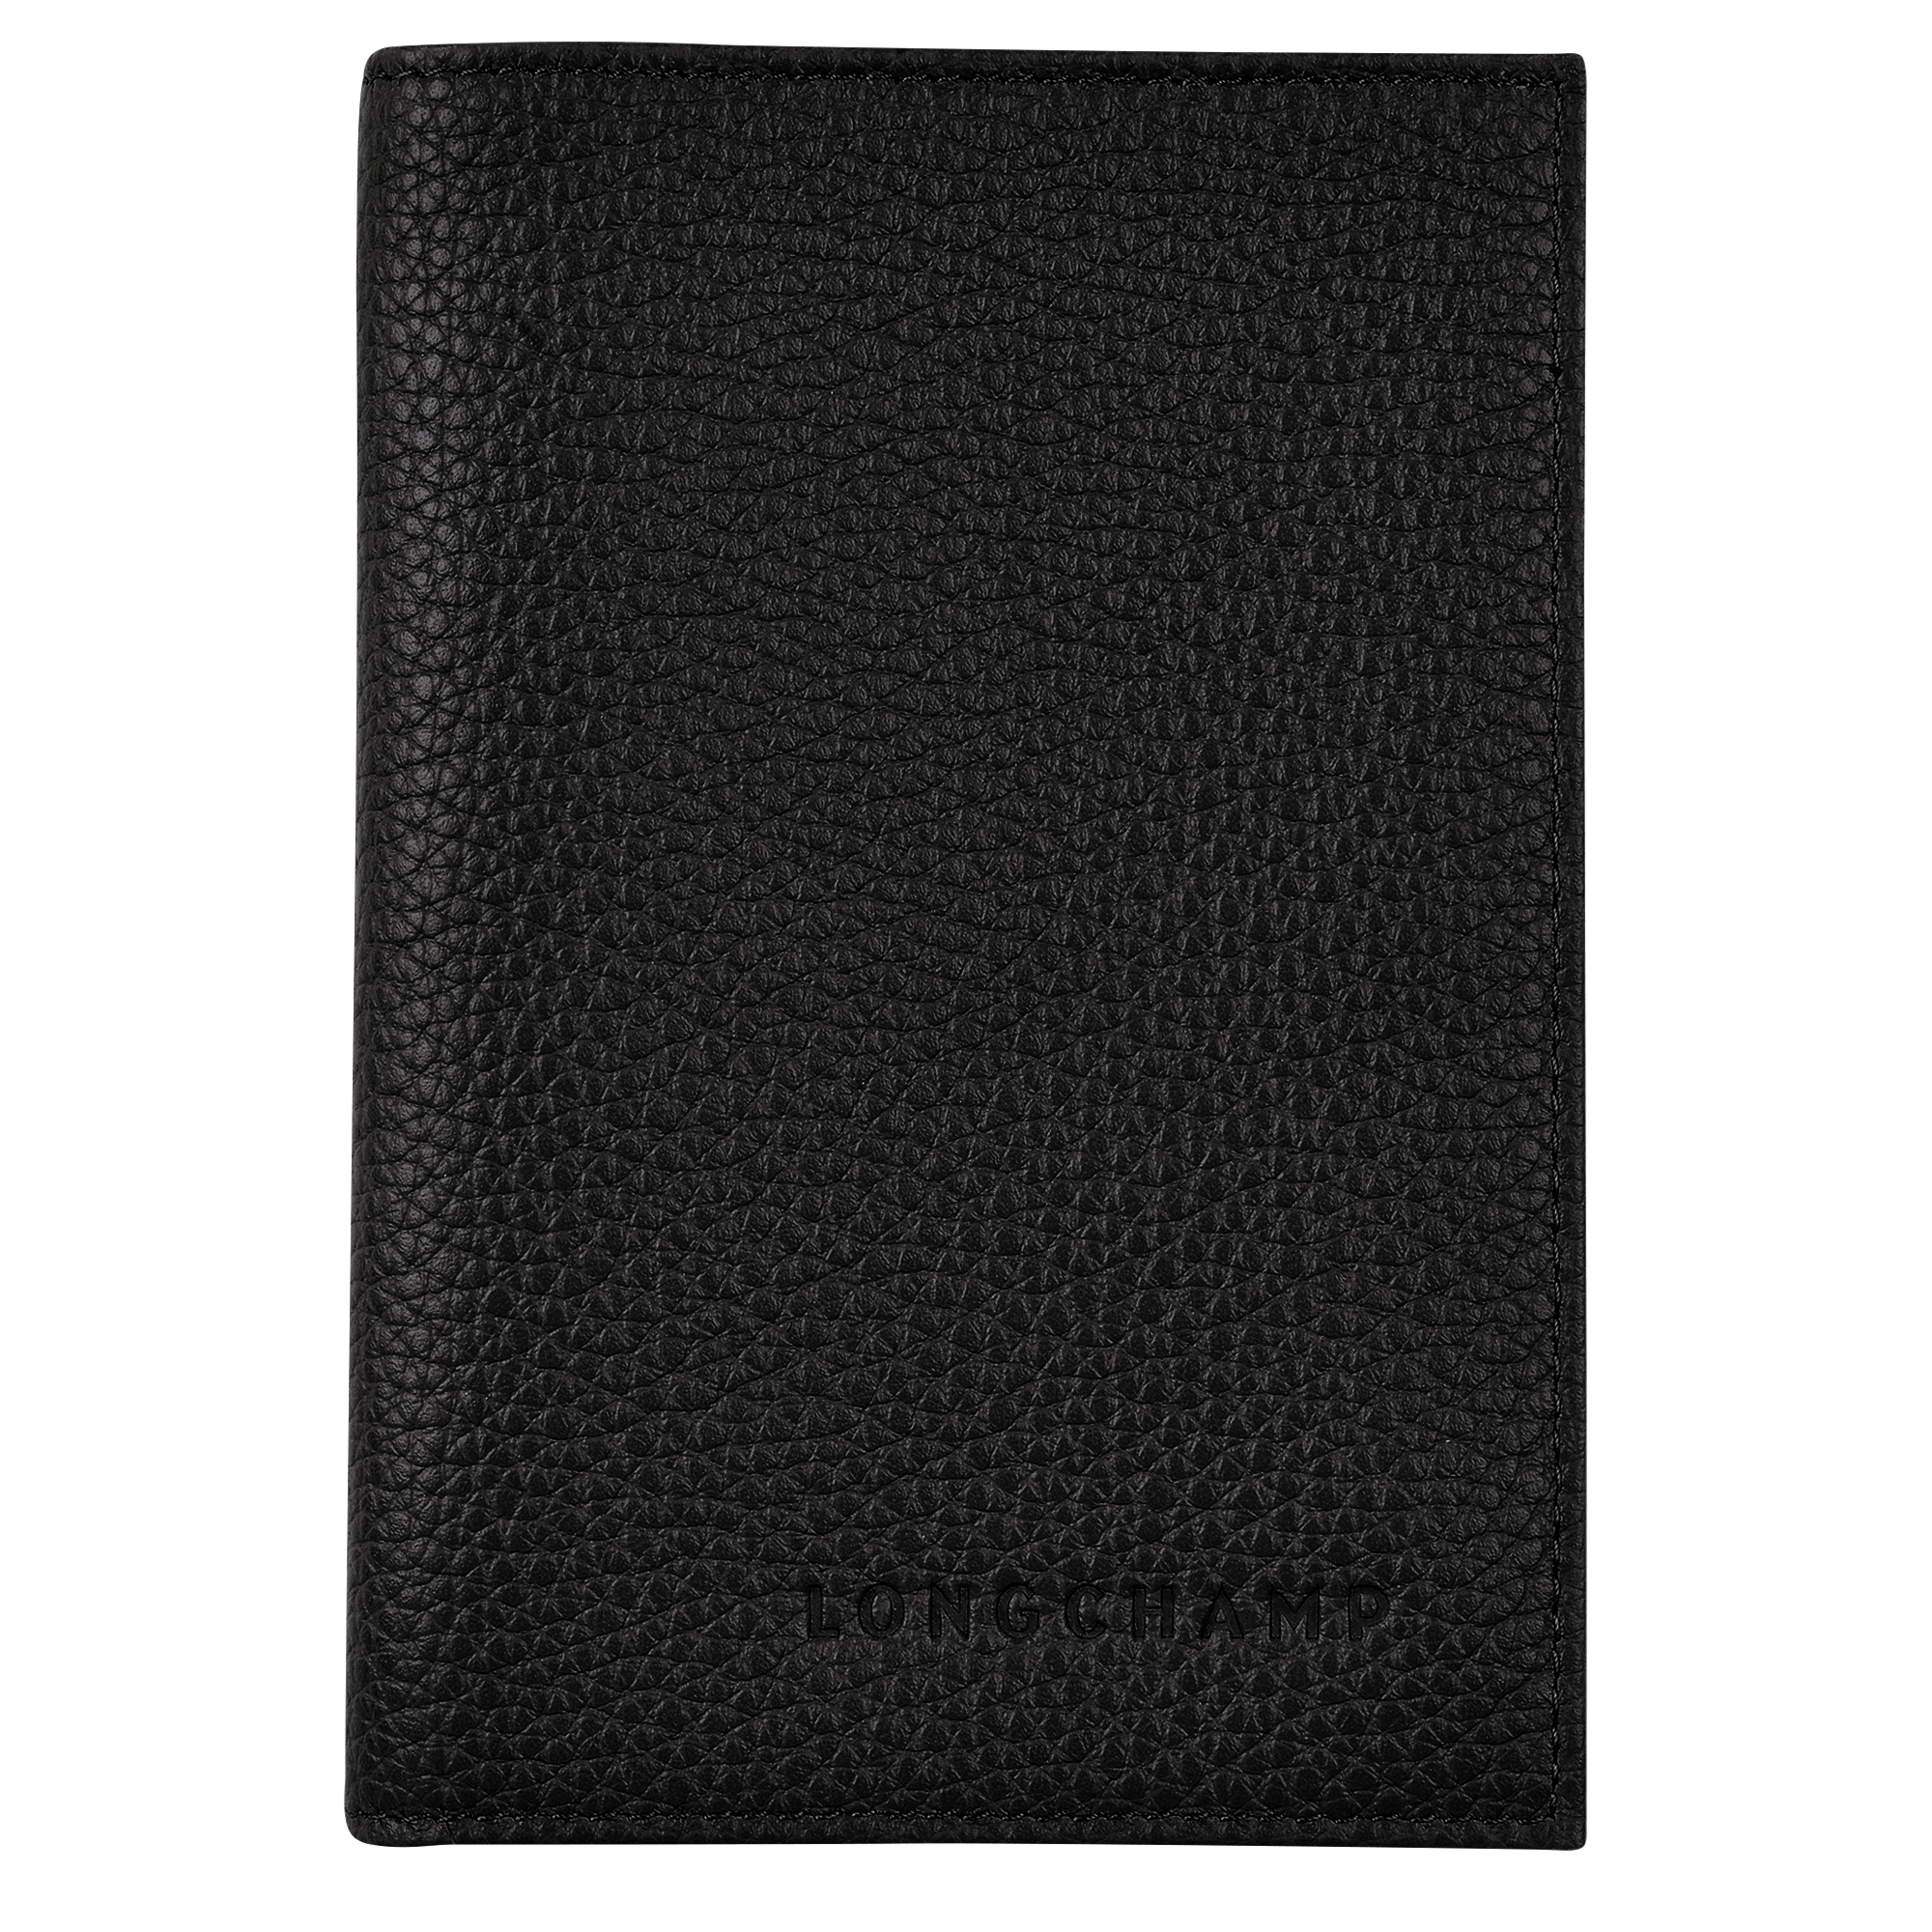 15 Best Passport Holders and Wallets to Keep Documents Safe (2023)